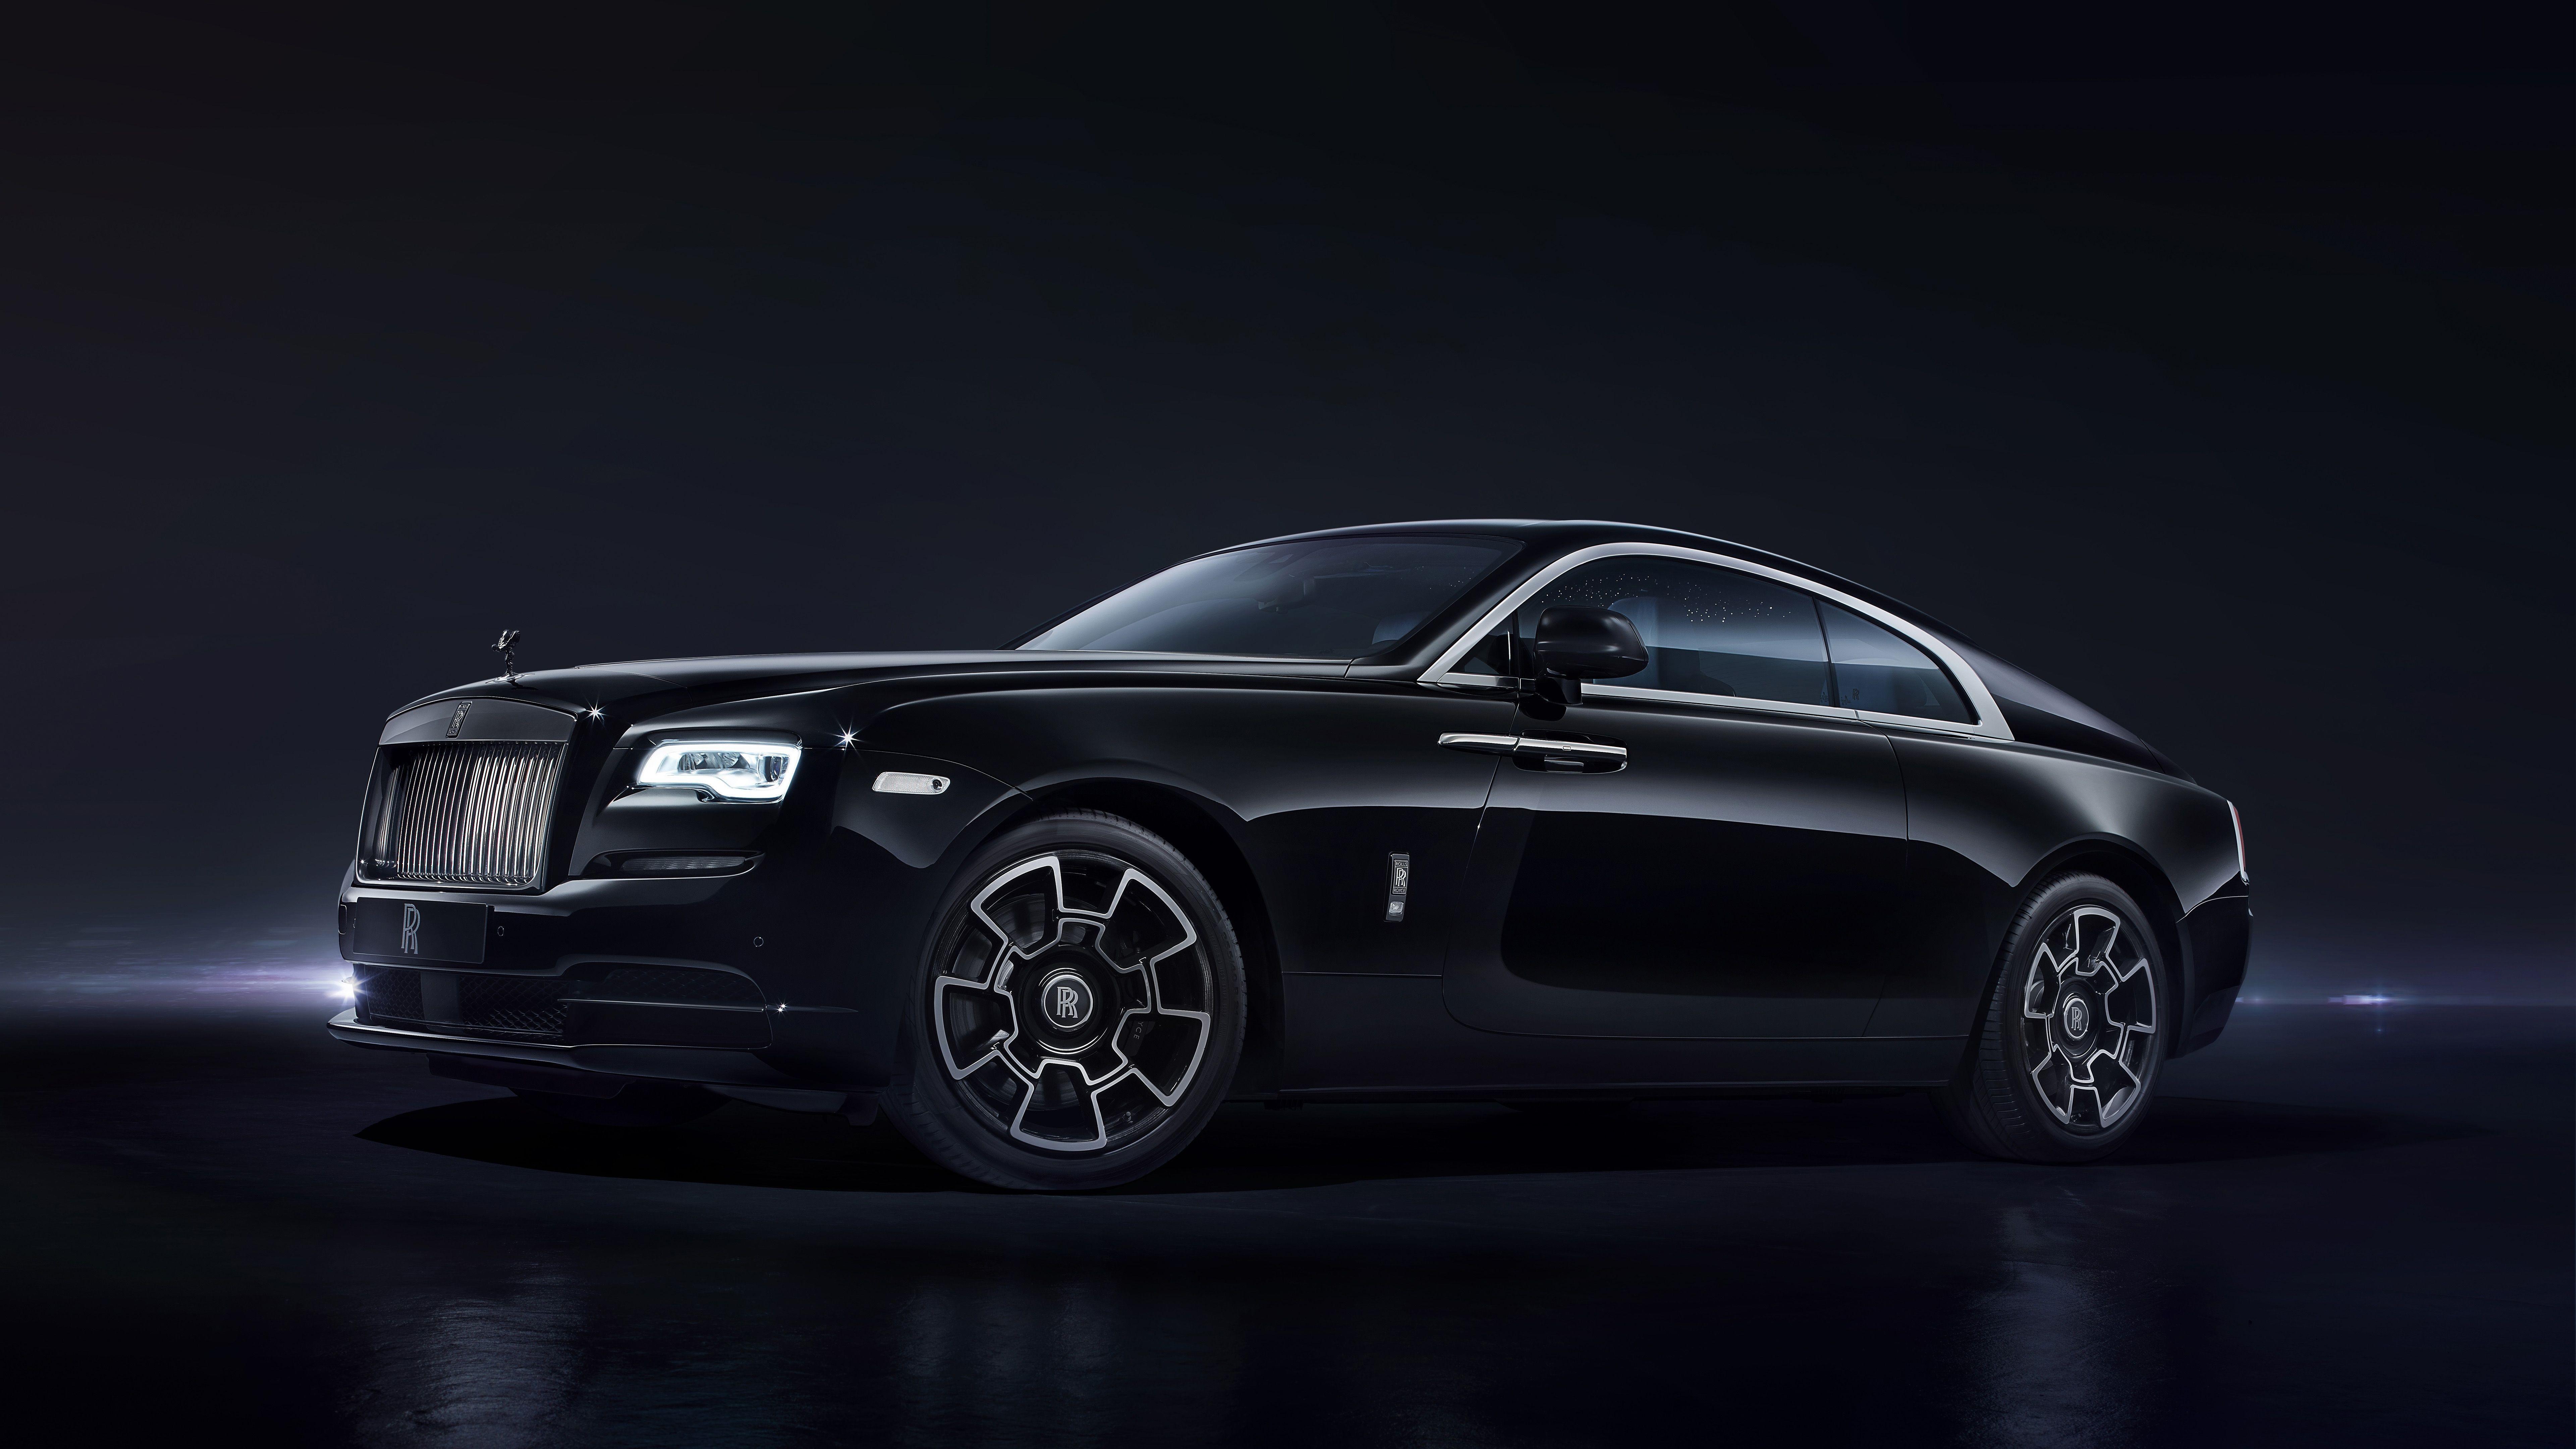 Rolls royce logo wallpaper for free download about (139) wallpaper